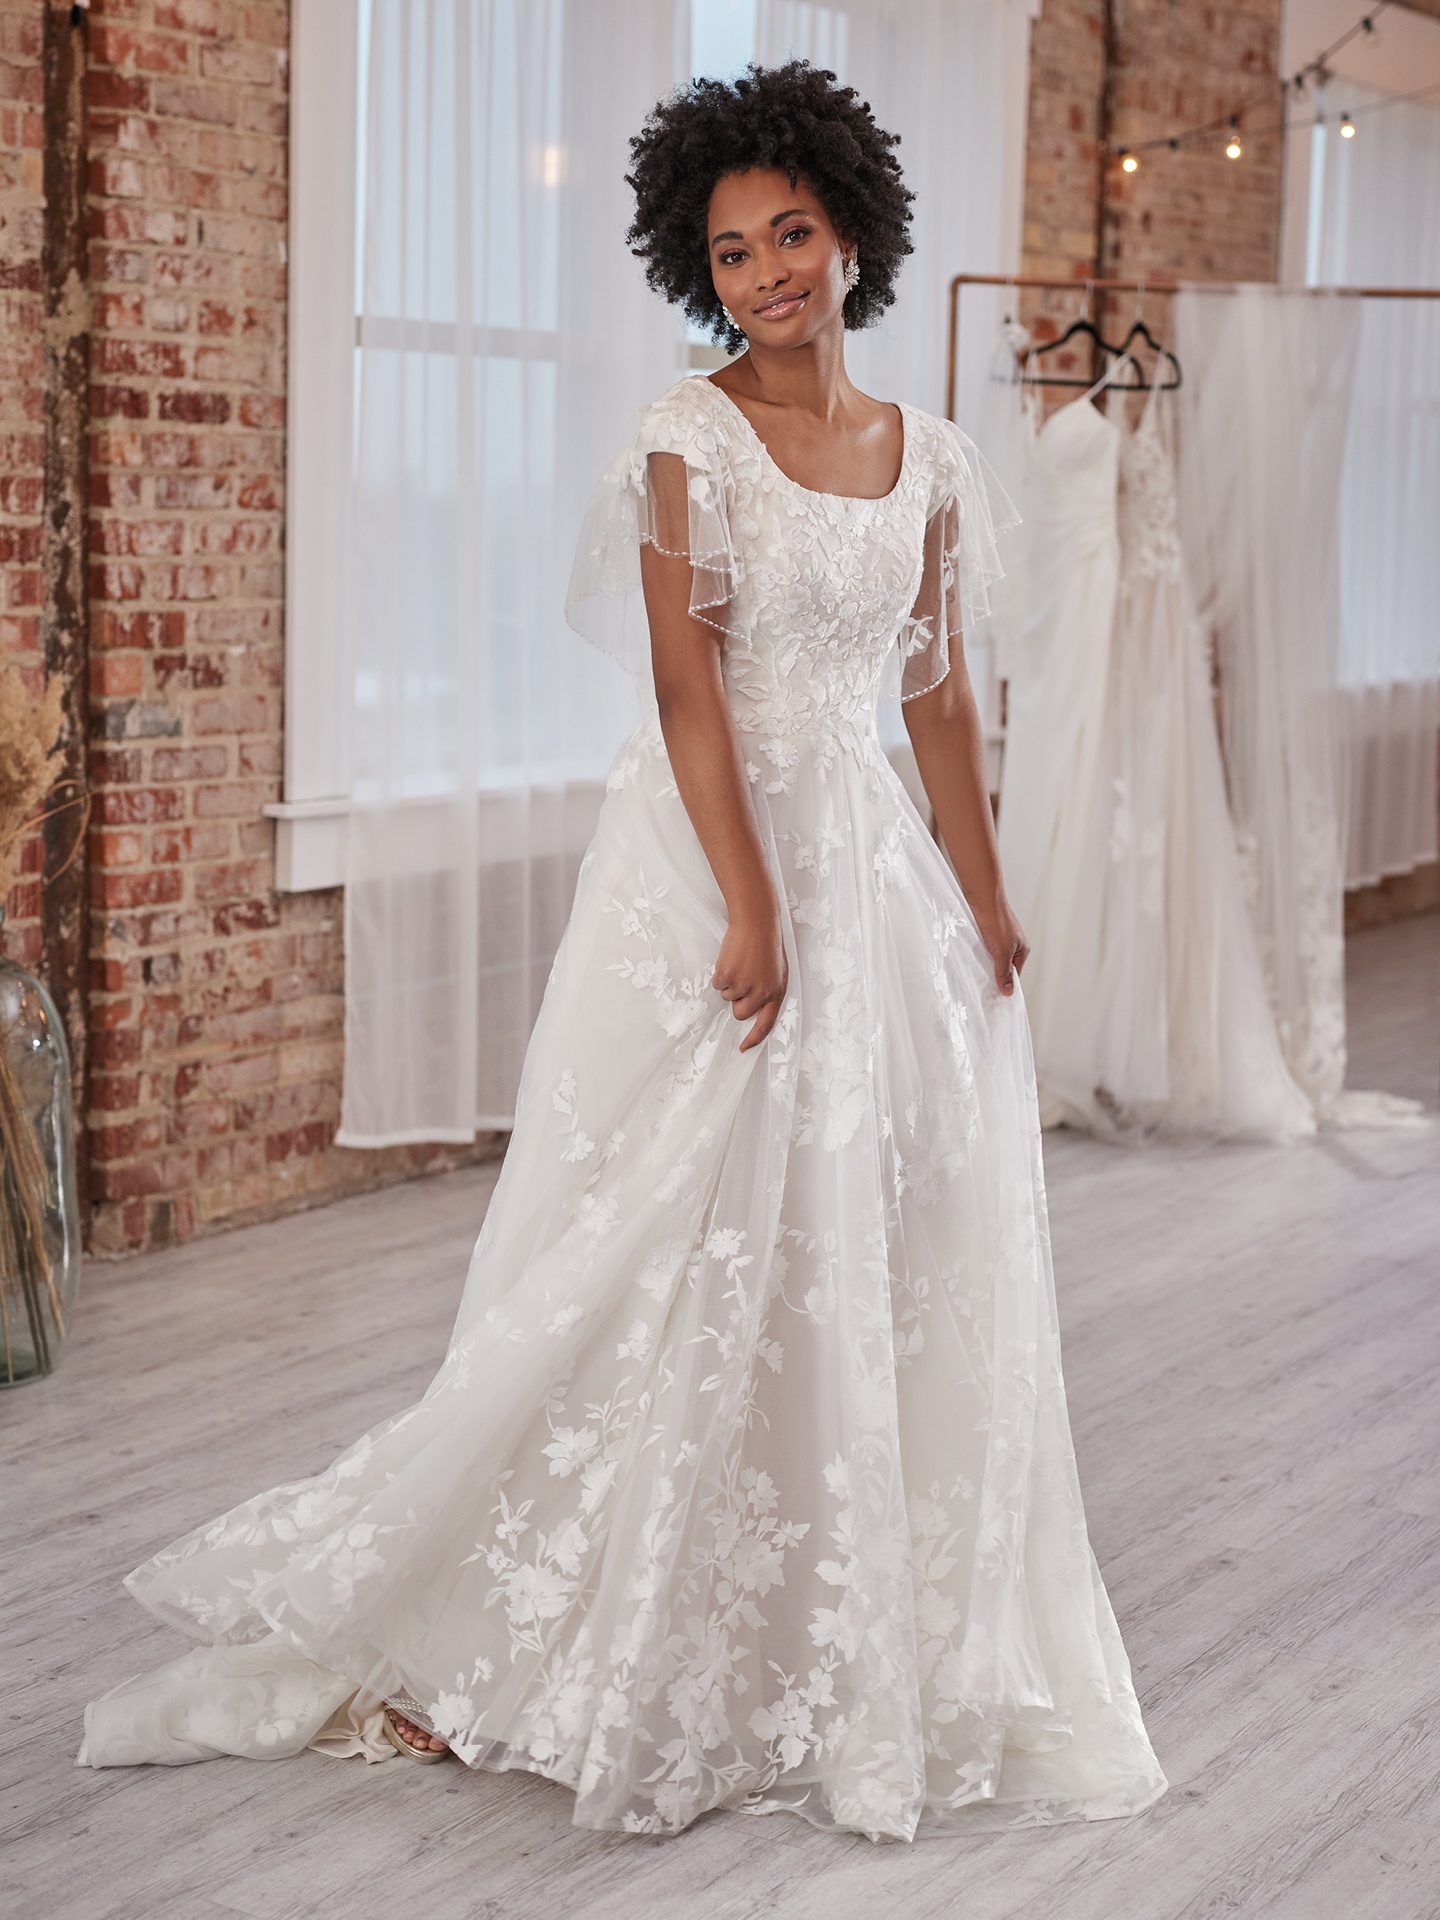 Winter Wedding Dresses – What to Wear When It Is Cold